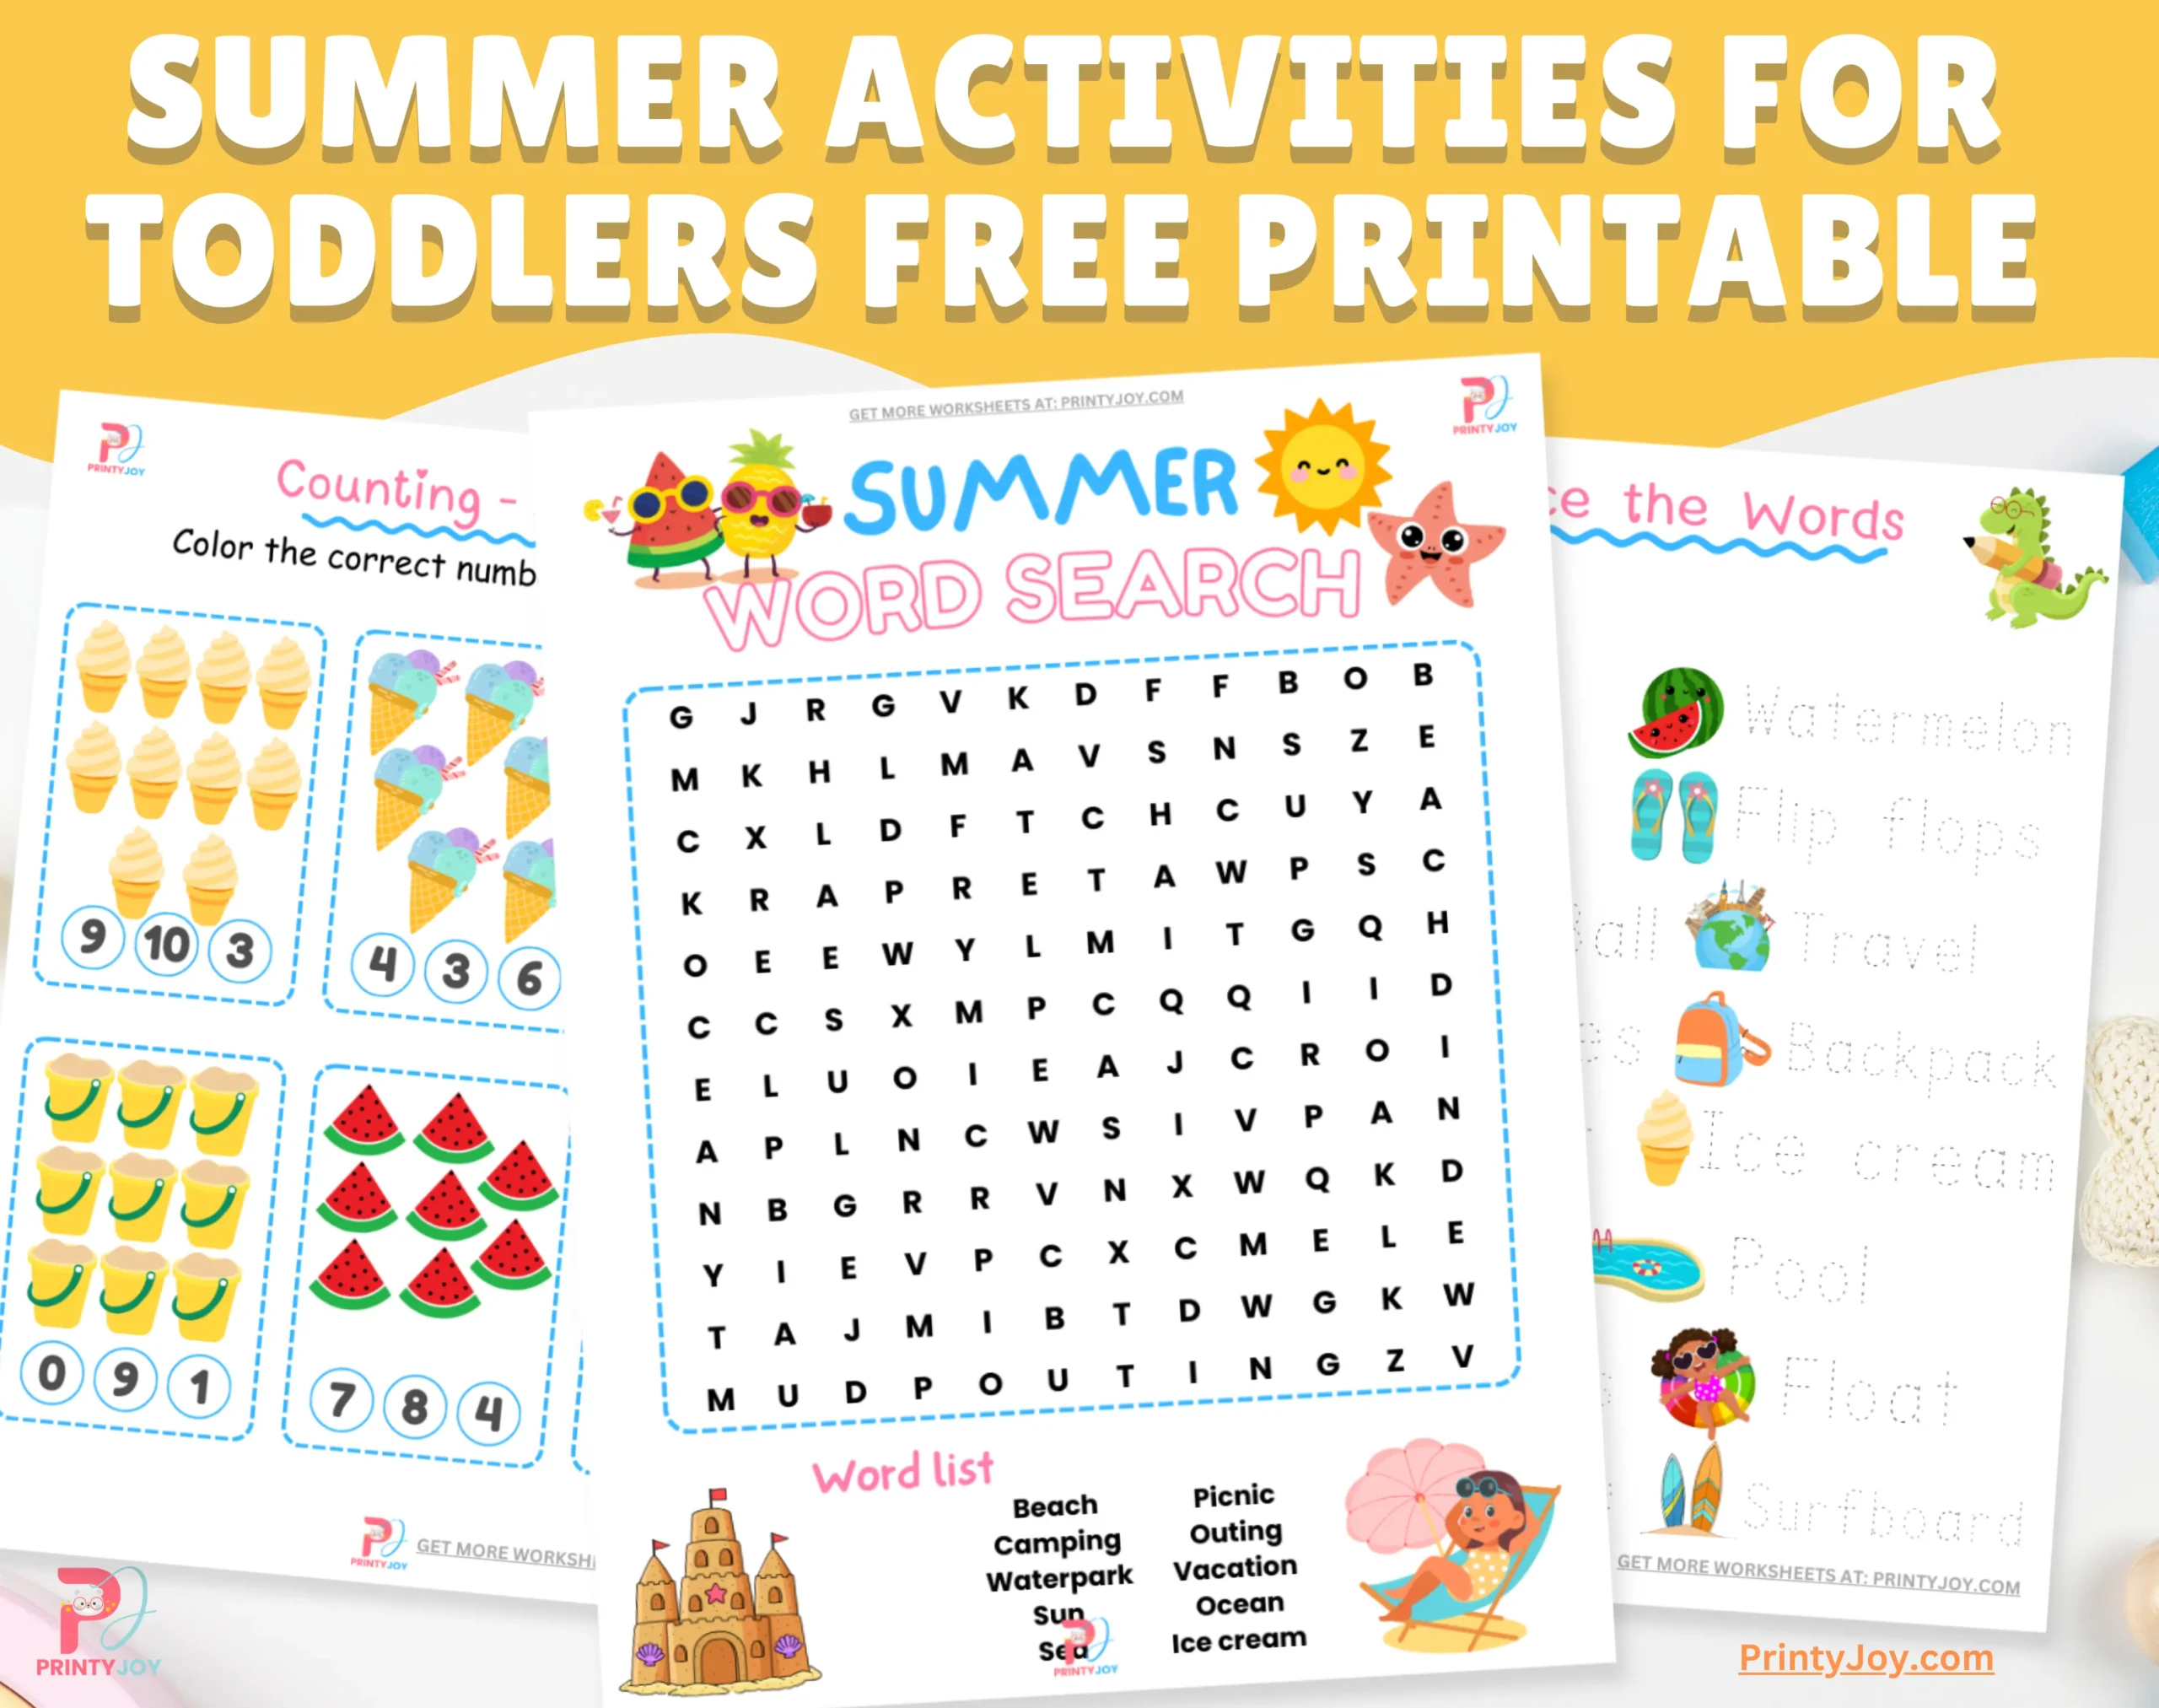 Summer Activities For Toddlers Free Printable